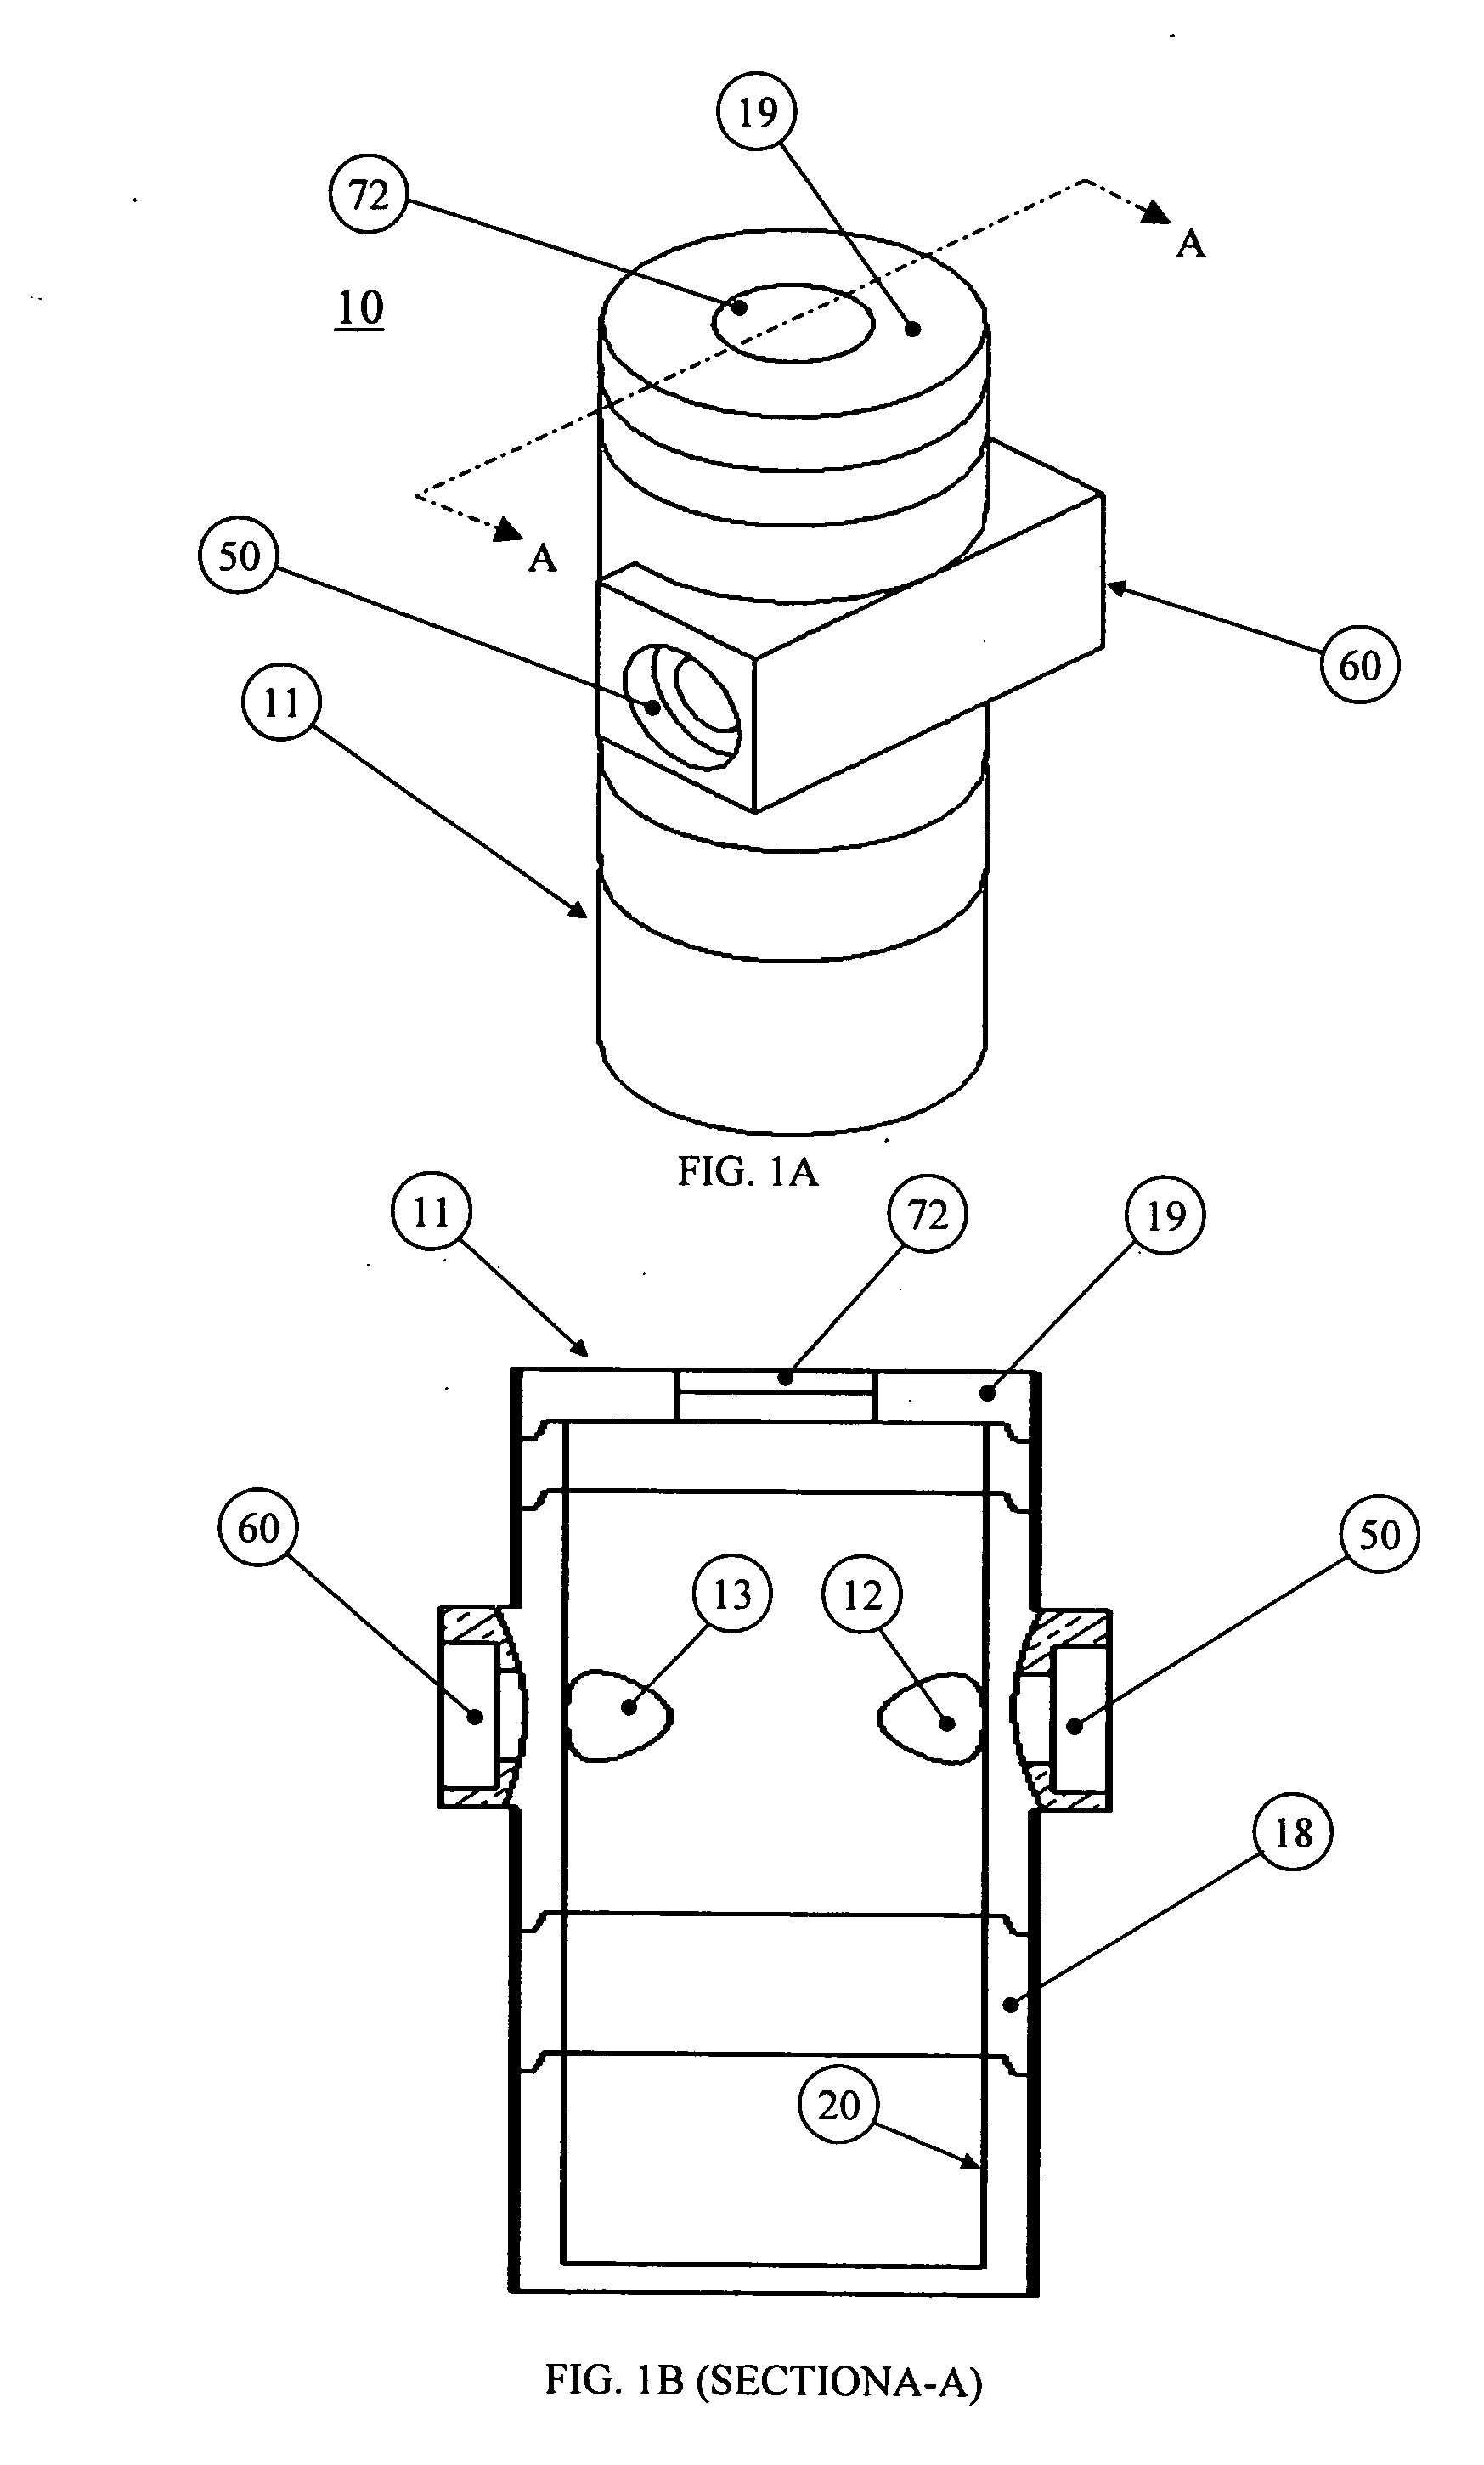 Apparatus for separating particulates from a fluid stream